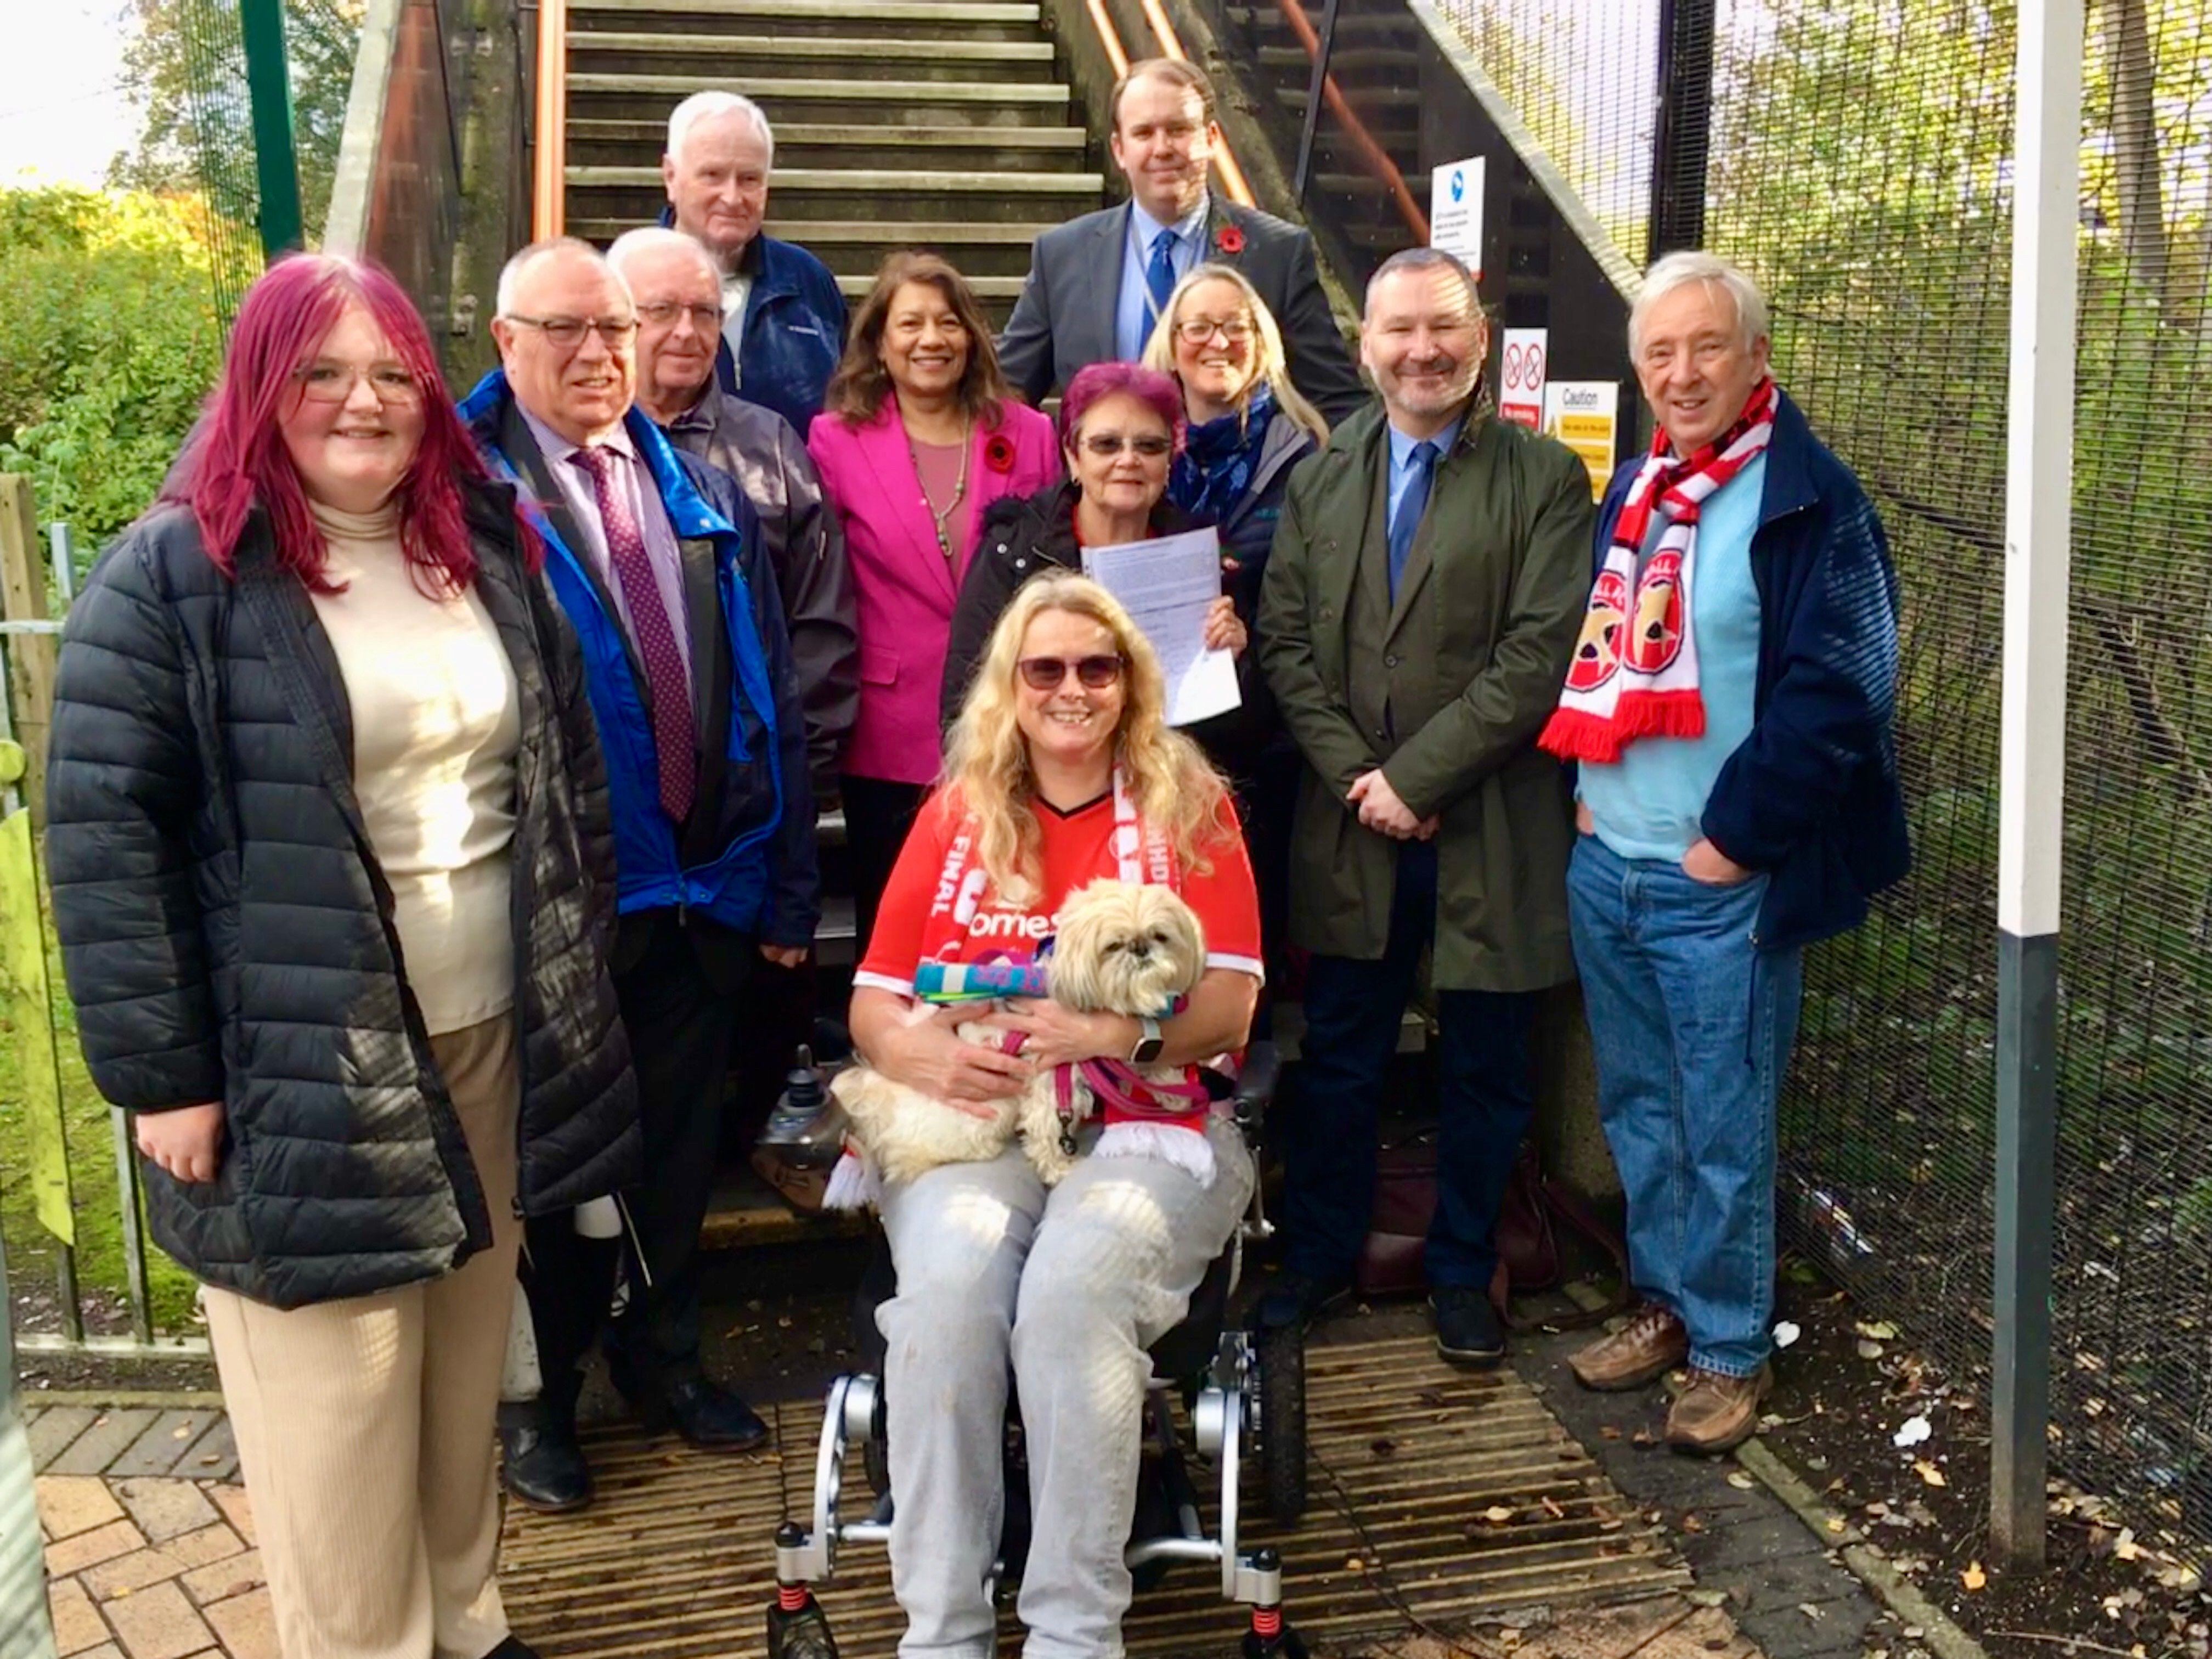 Call for disabled access at key Walsall railway station